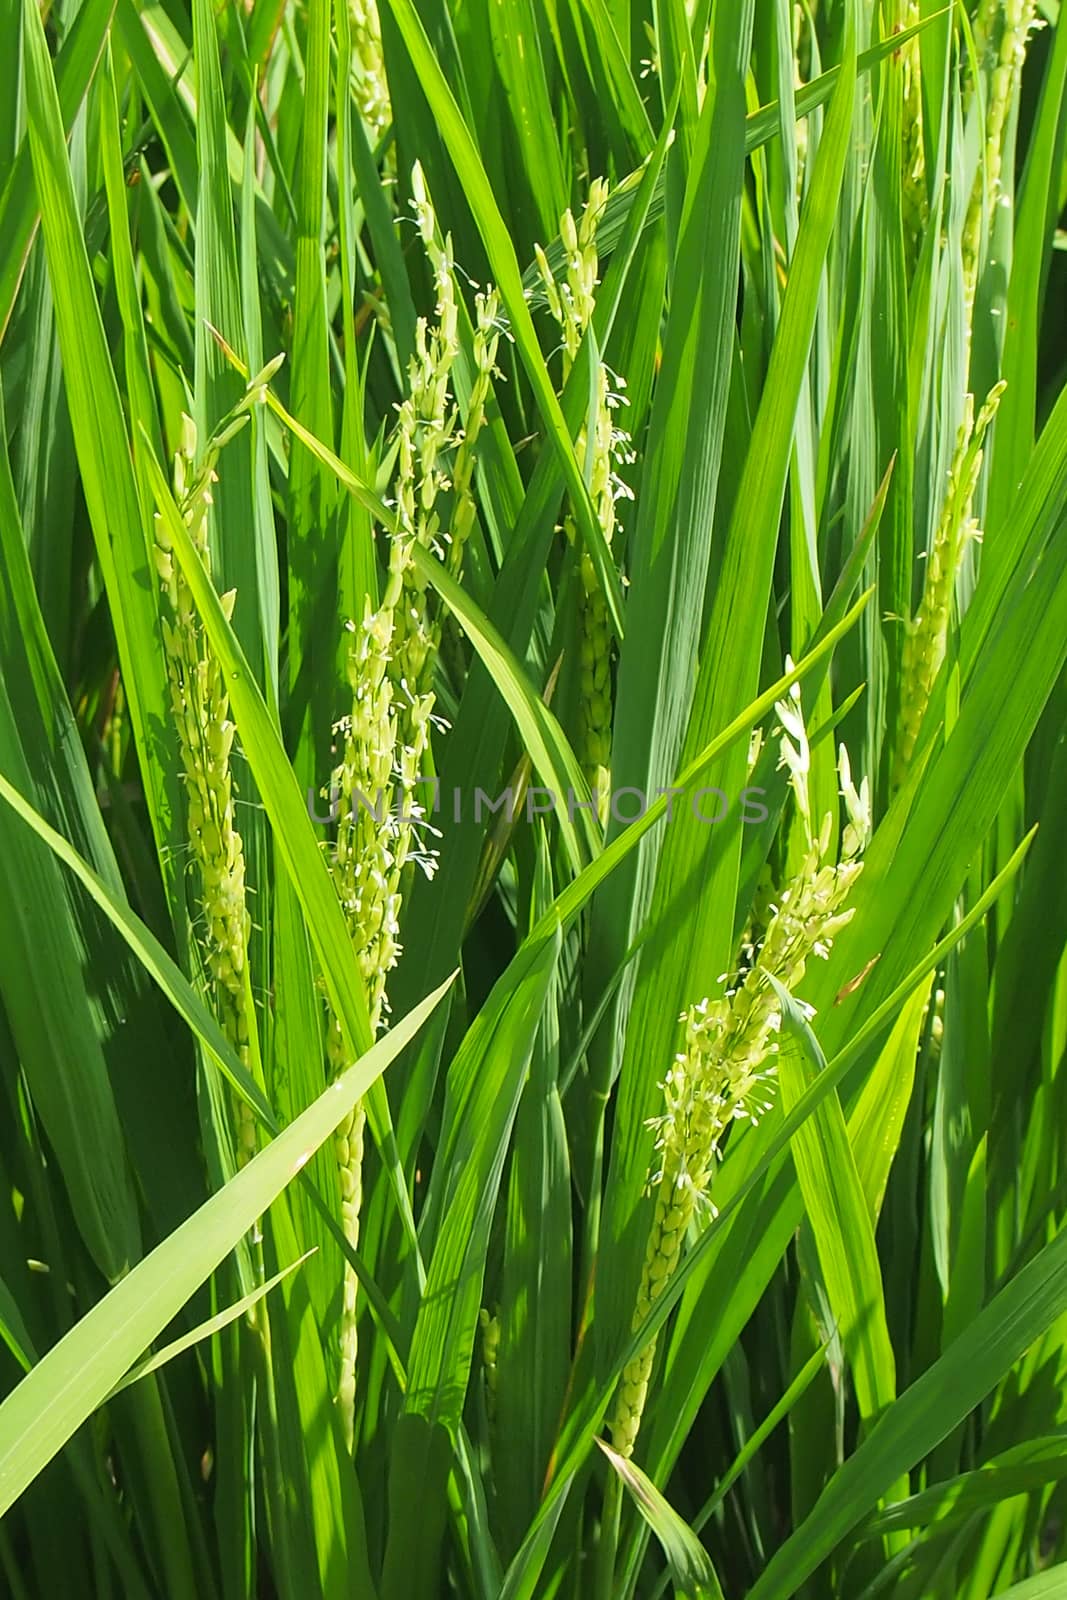 Green rice plant on country side